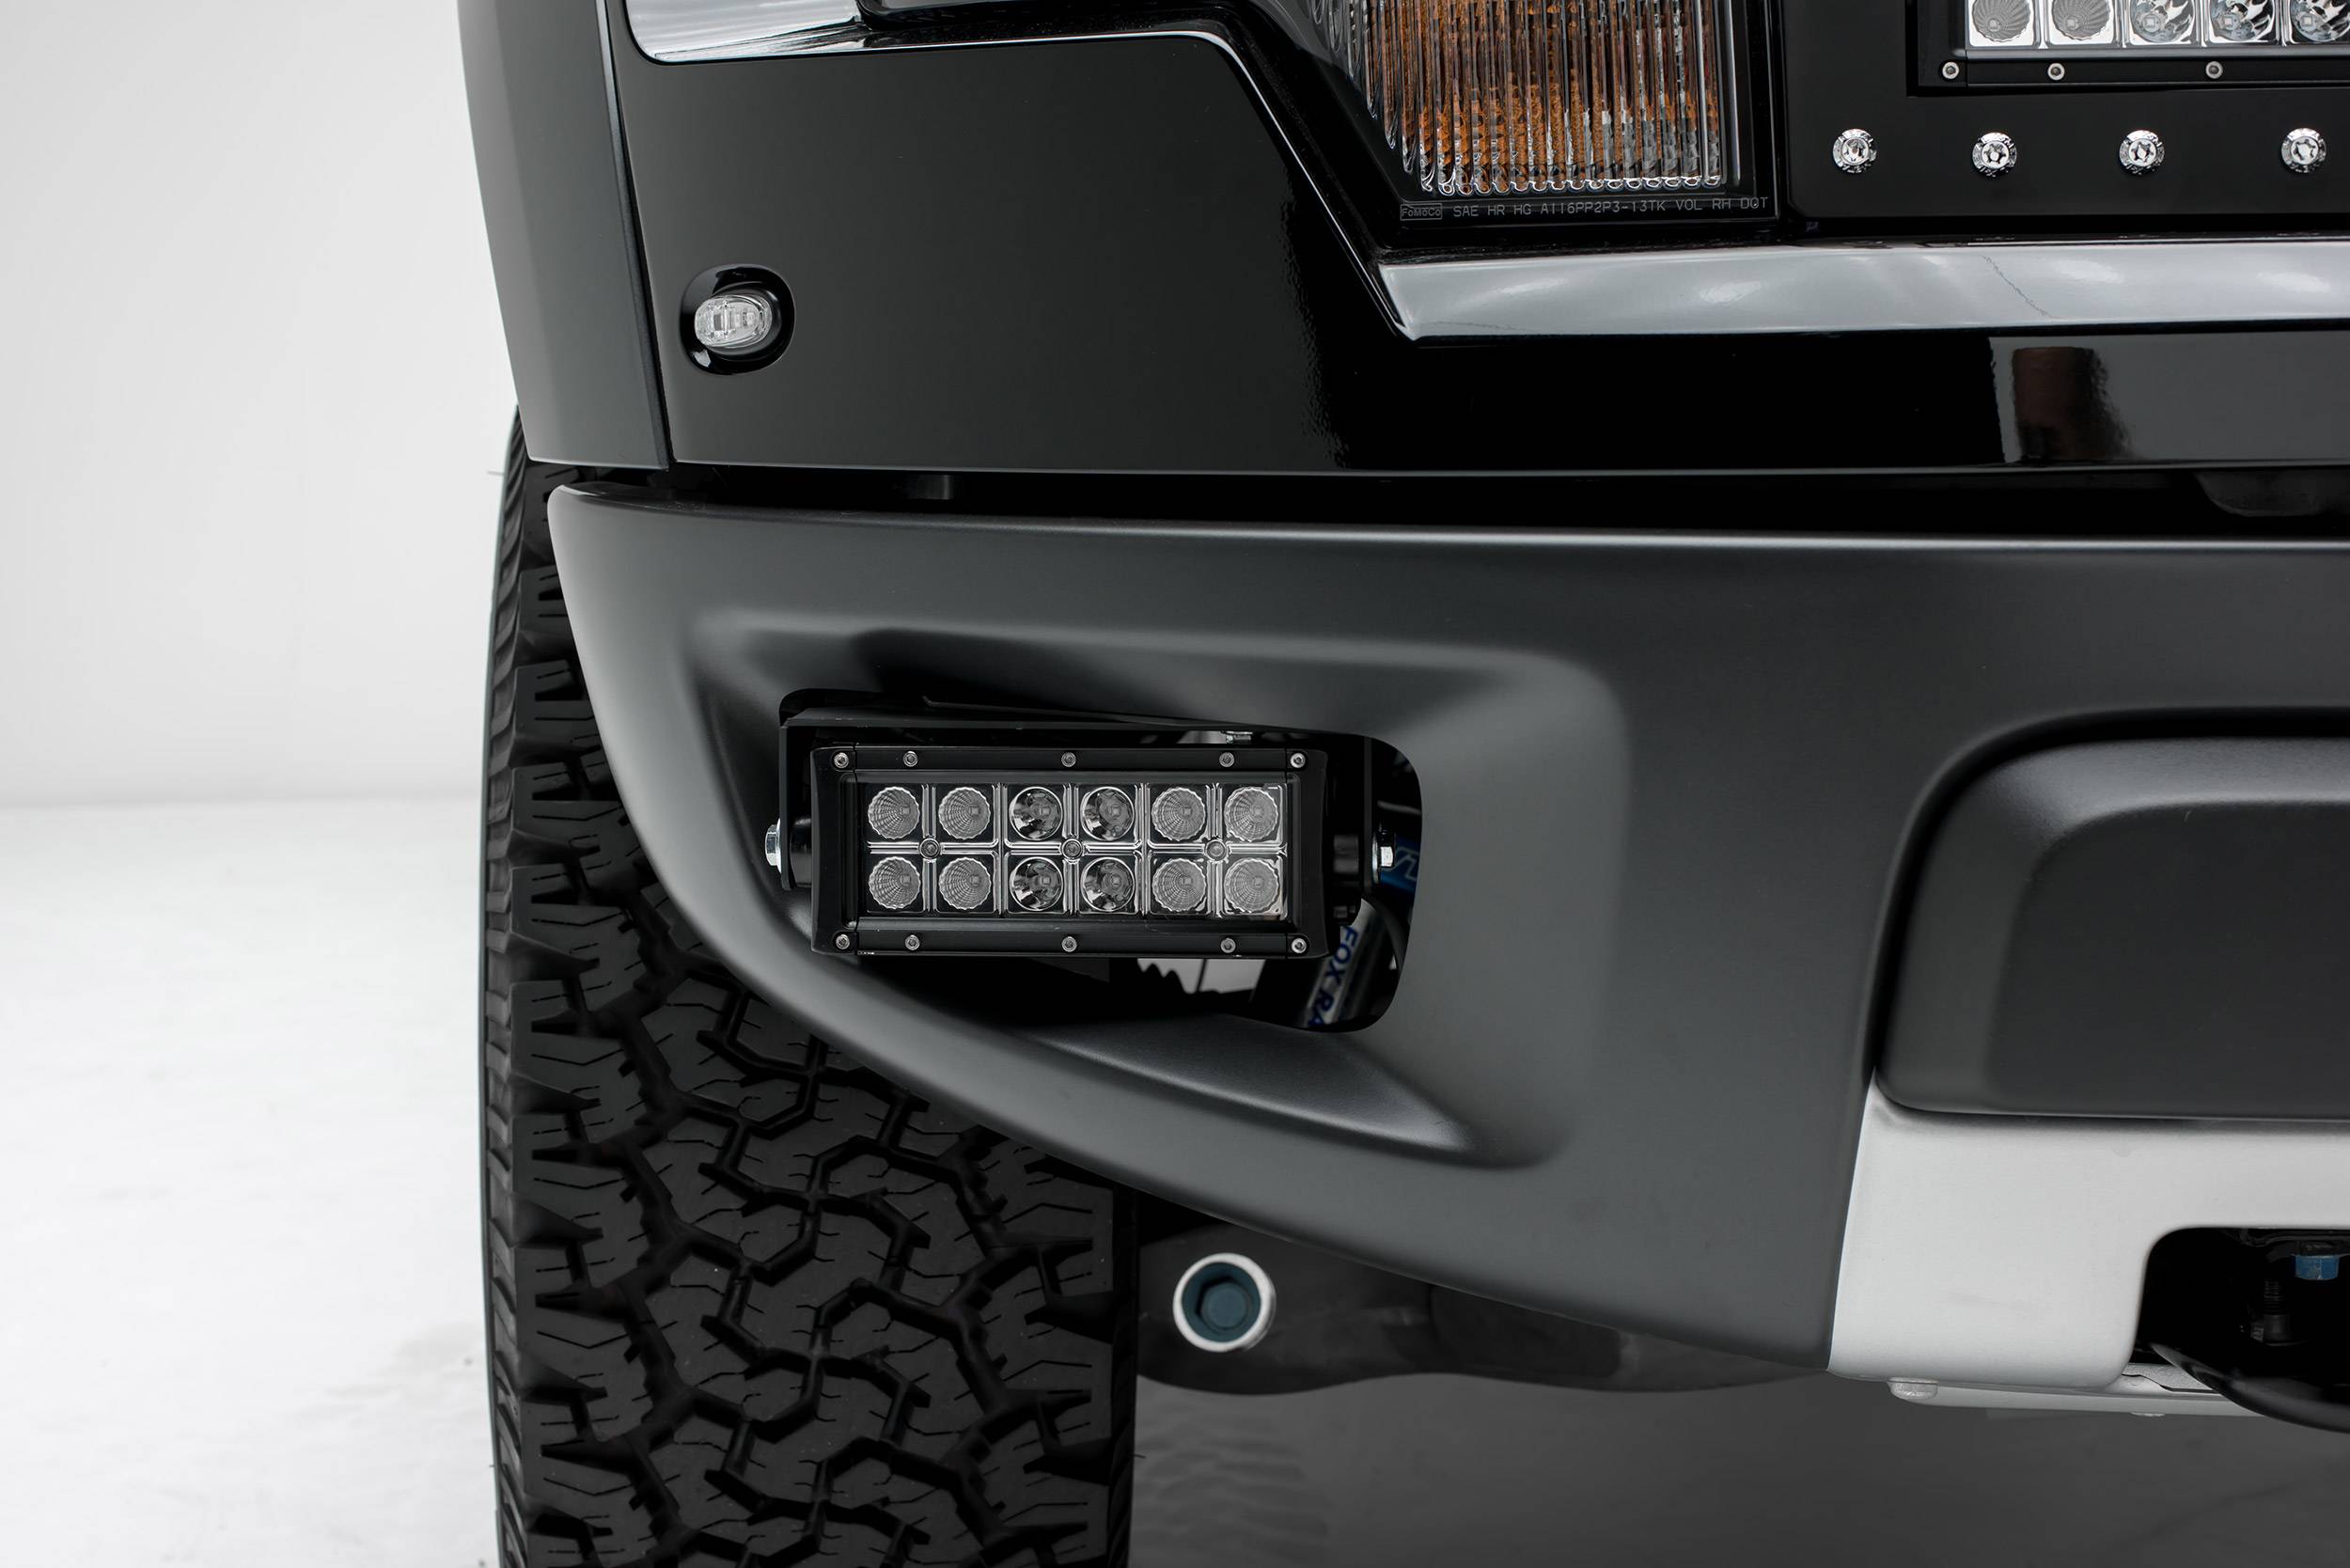 ZROADZ OFF ROAD PRODUCTS - 2010-2014 Ford F-150 Raptor Front Bumper OEM Fog LED Kit with (2) 6 Inch LED Straight Double Row Light Bars - Part # Z325651-KIT